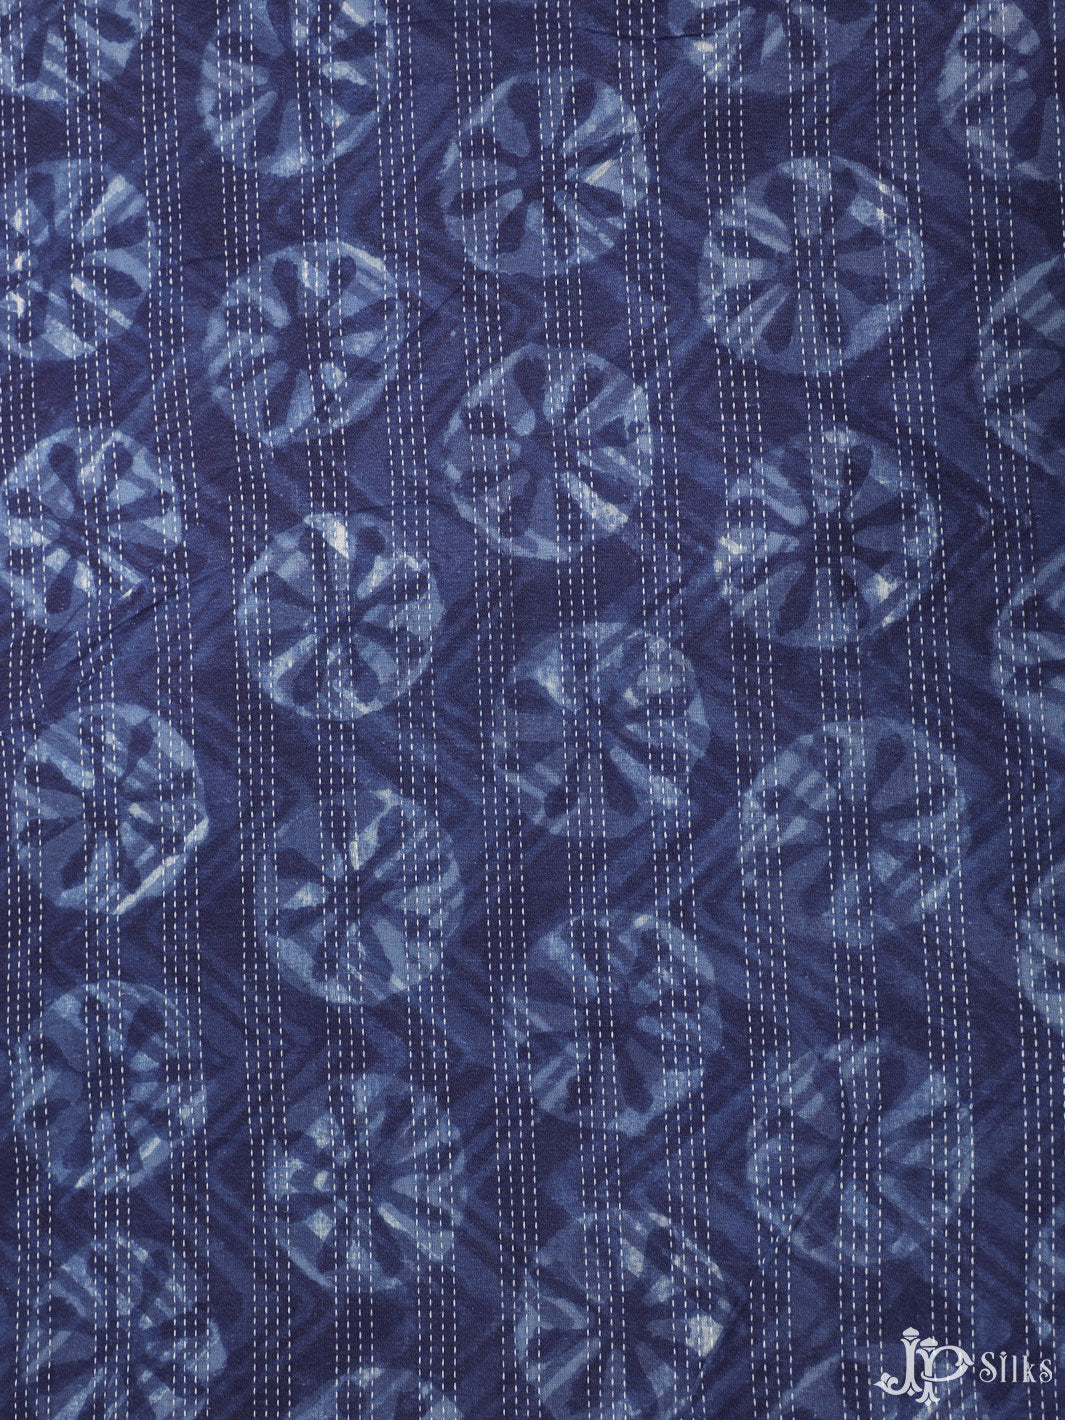 Navy Blue Digital Printed Cotton Fabric - D1773 - View 1